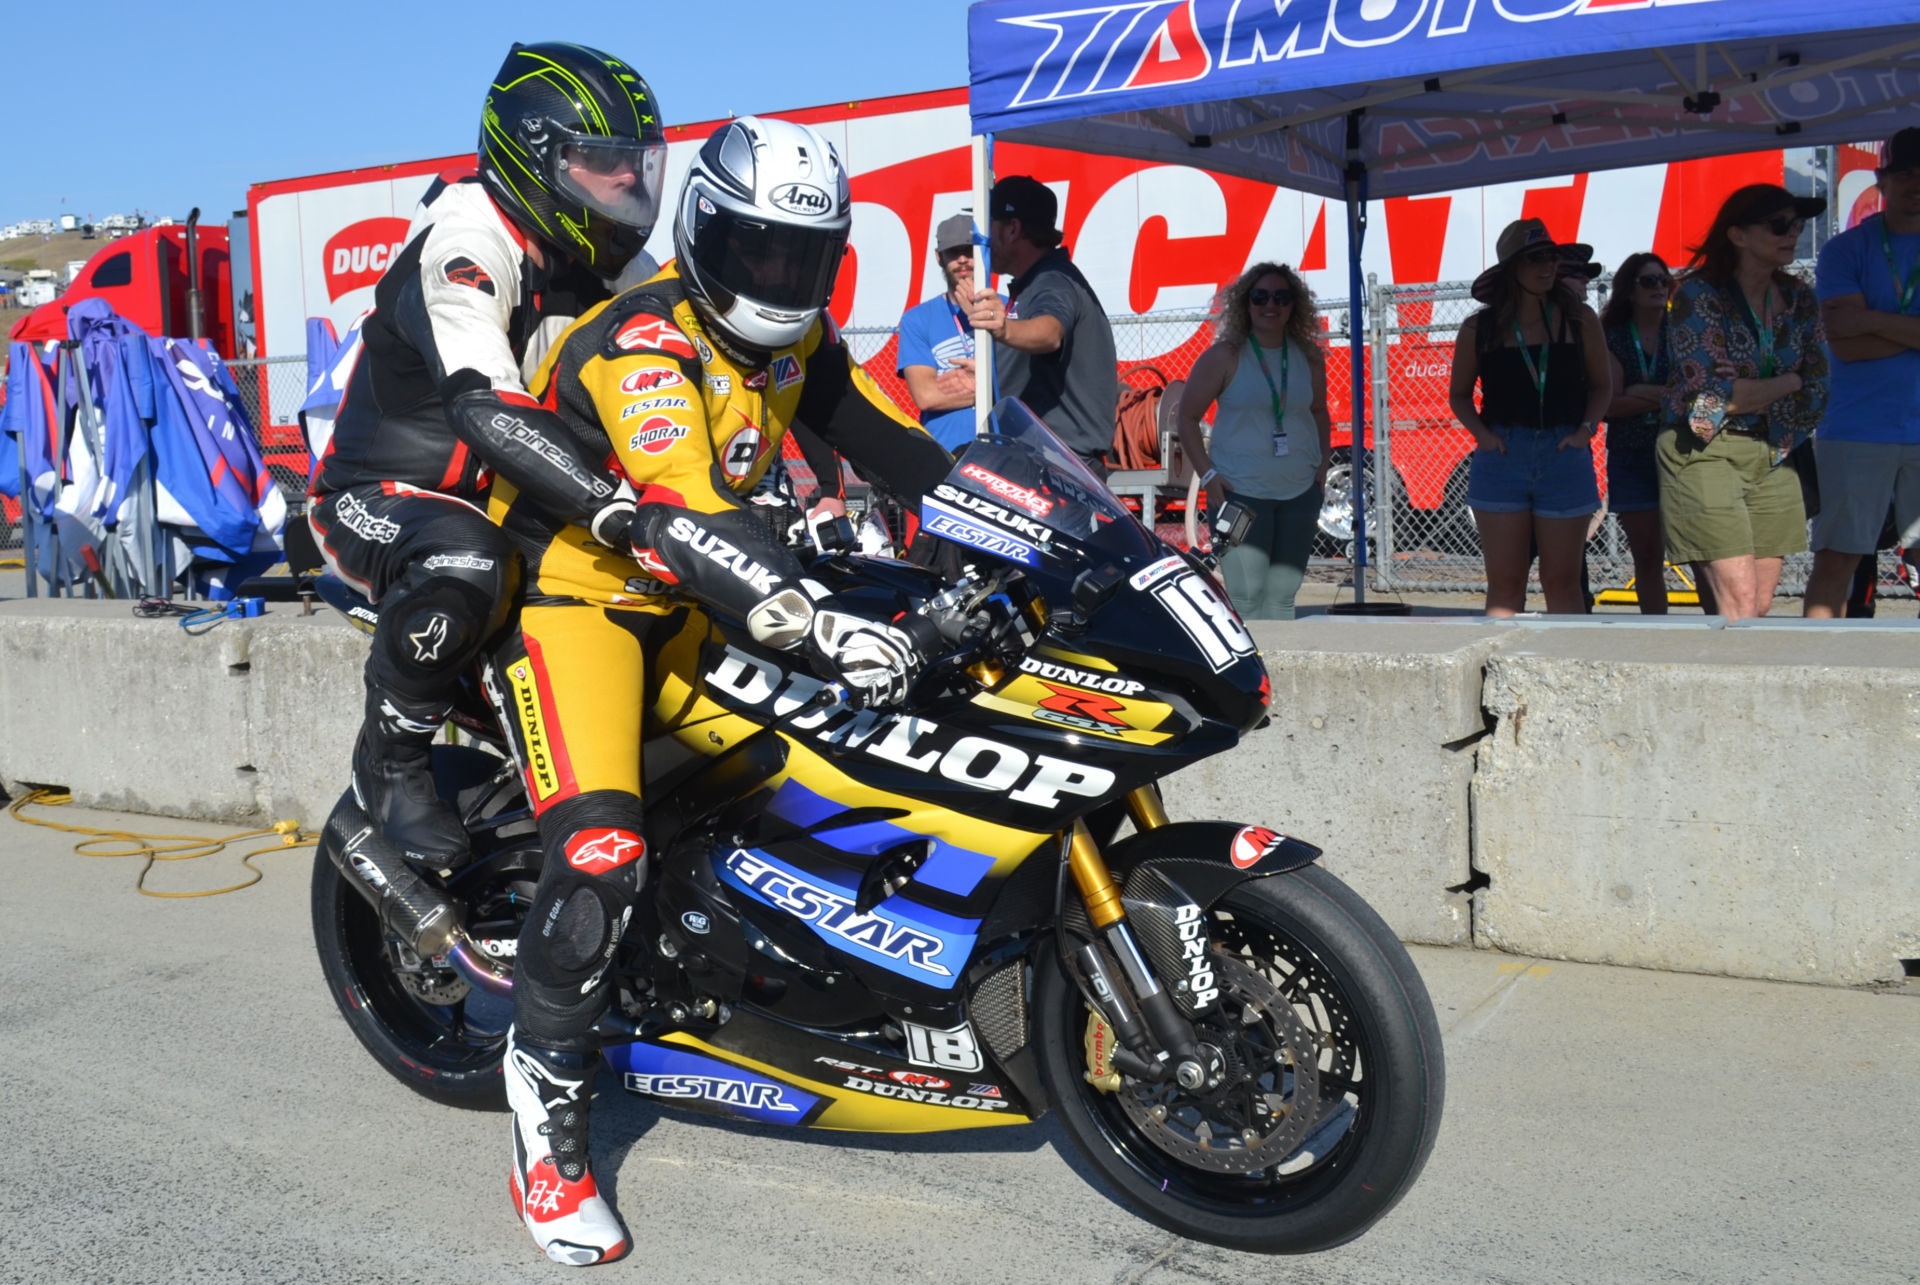 Medallia President and CEO Leslie Stretch about to go for a ride with former Pro Superbike racer Chris Ulrich on the Dunlop ECSTAR Suzuki two-seat Superbike at WeatherTech Raceway Laguna Seca in 2021. Photo by David Swarts.